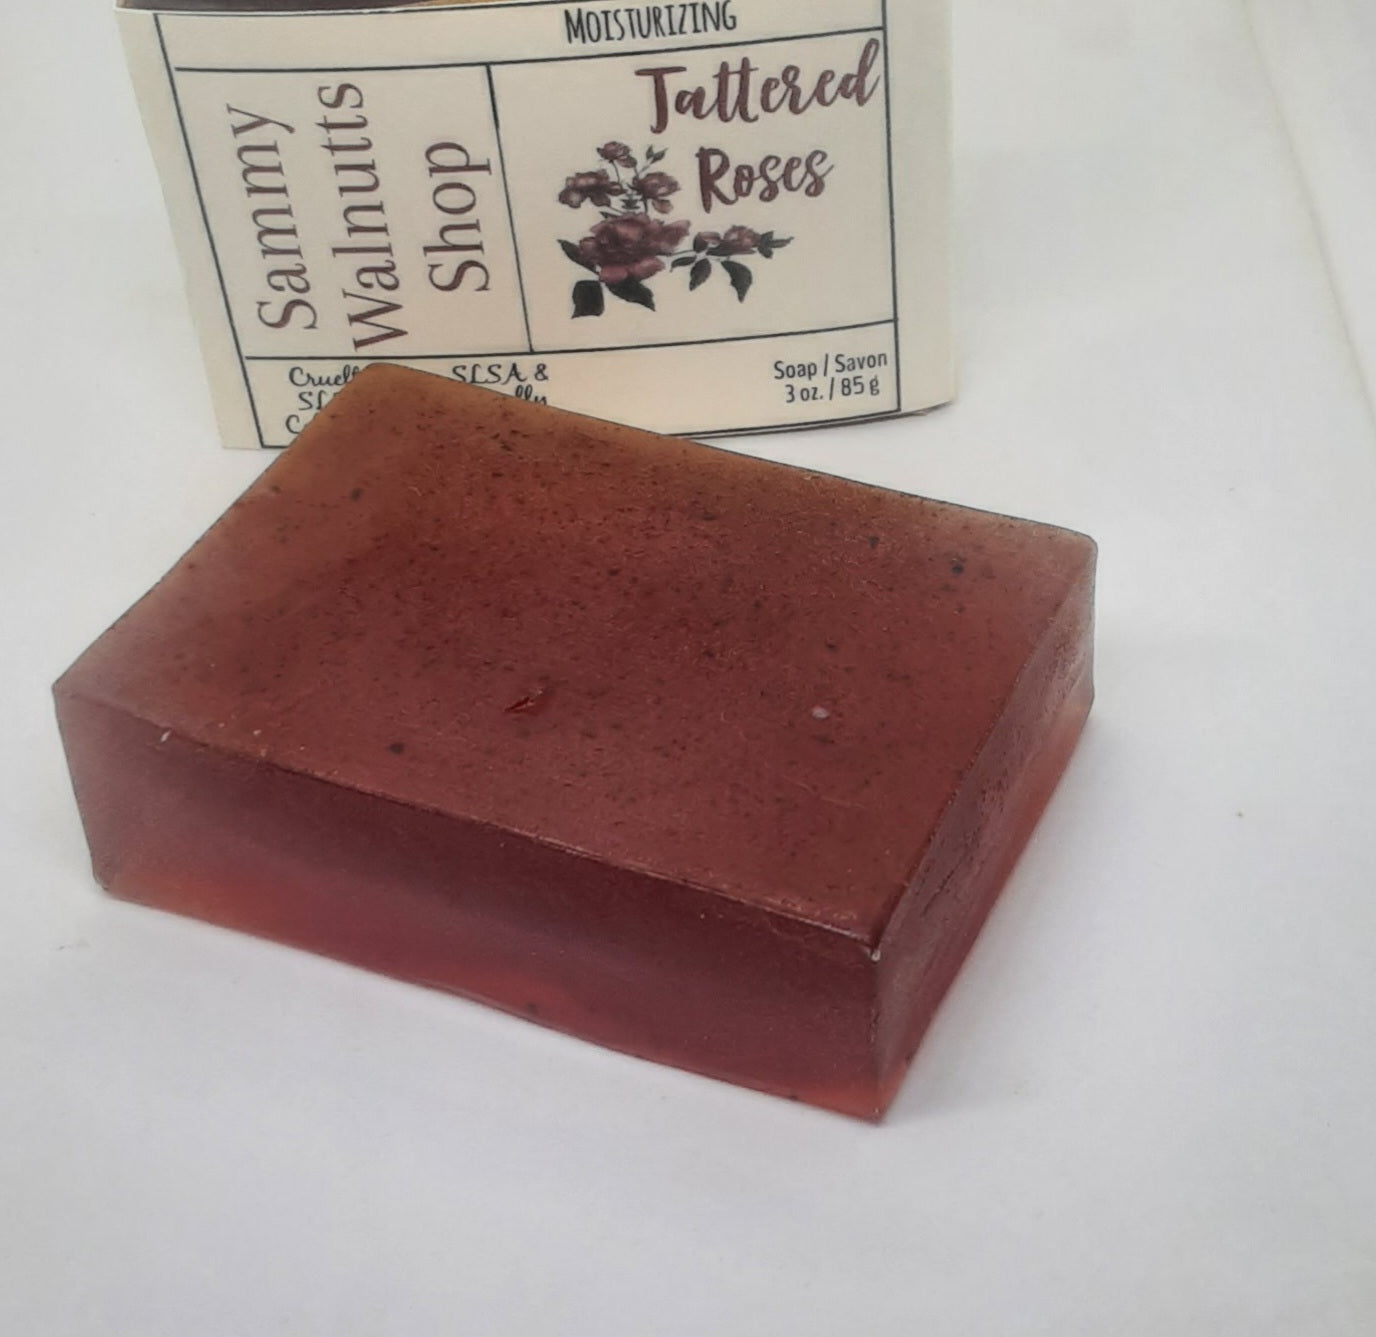 Tattered Roses Soap Bars, Vegan, Naturally Coloured, Signature Scent